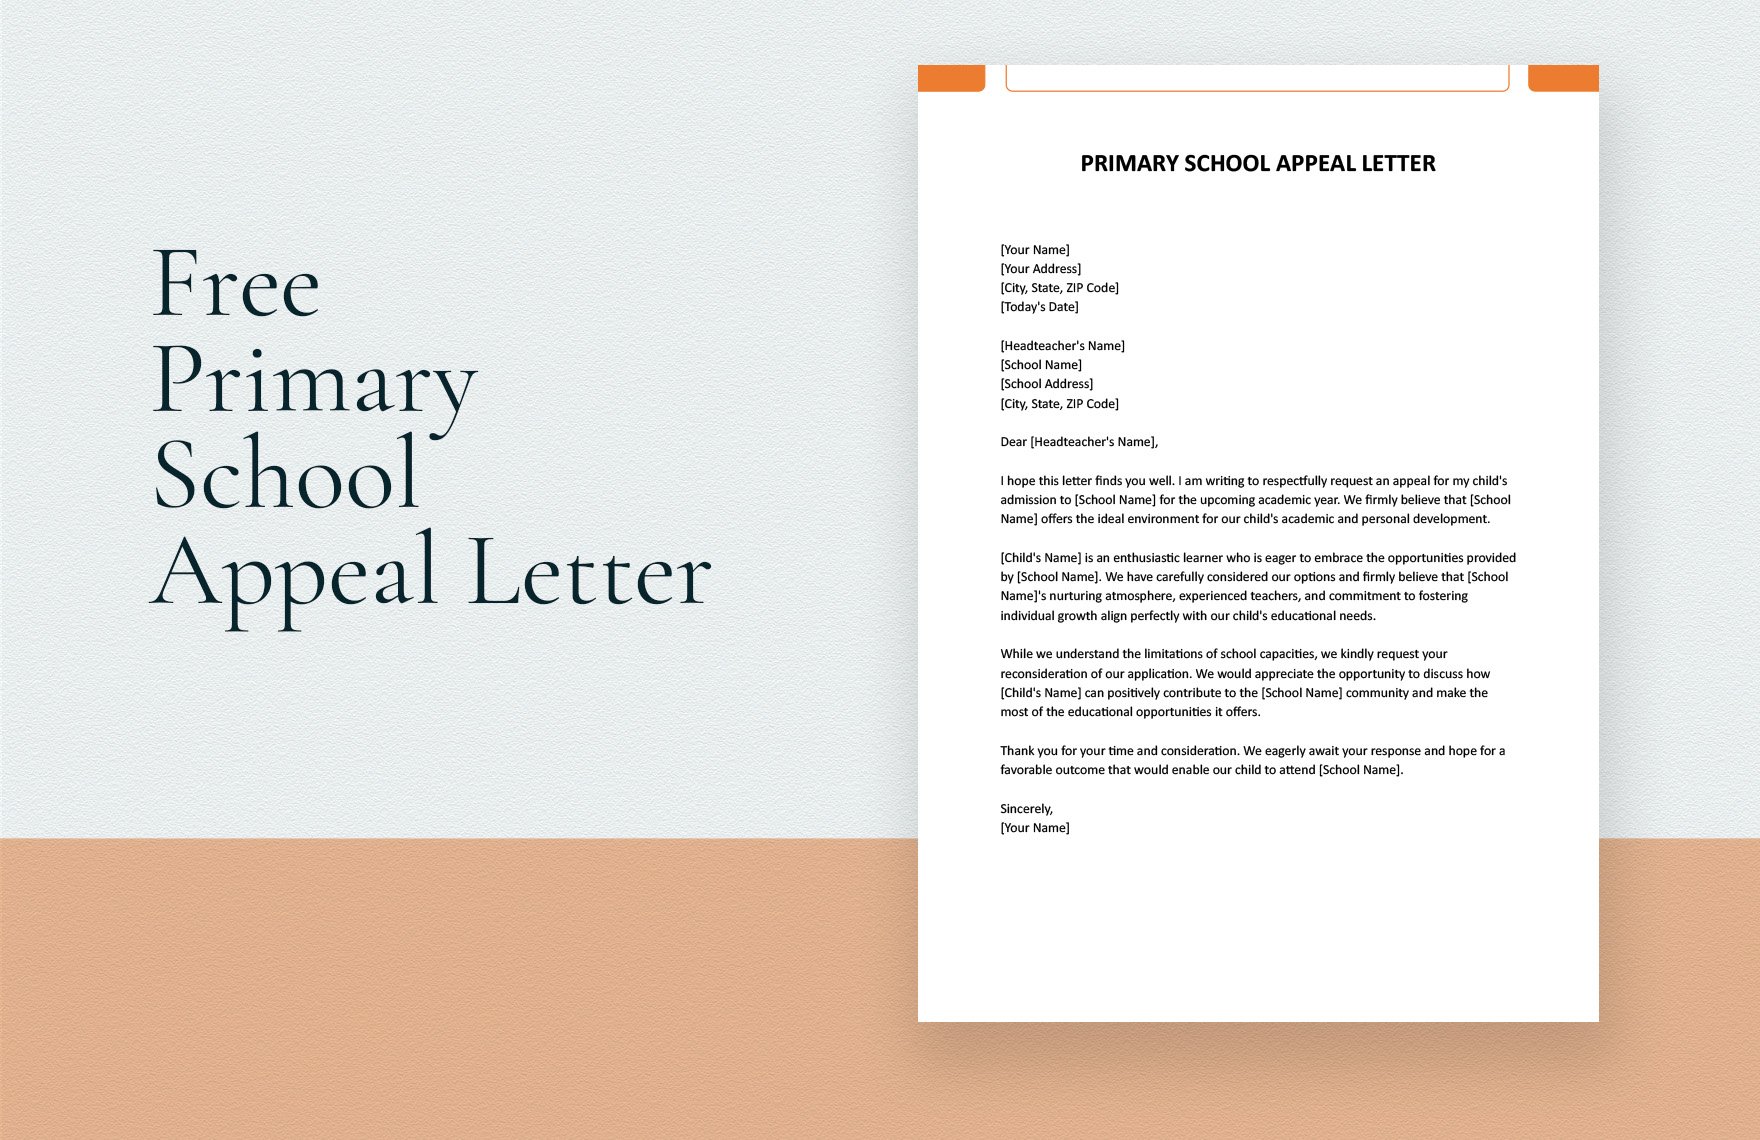 Primary School Appeal Letter in Word, Google Docs